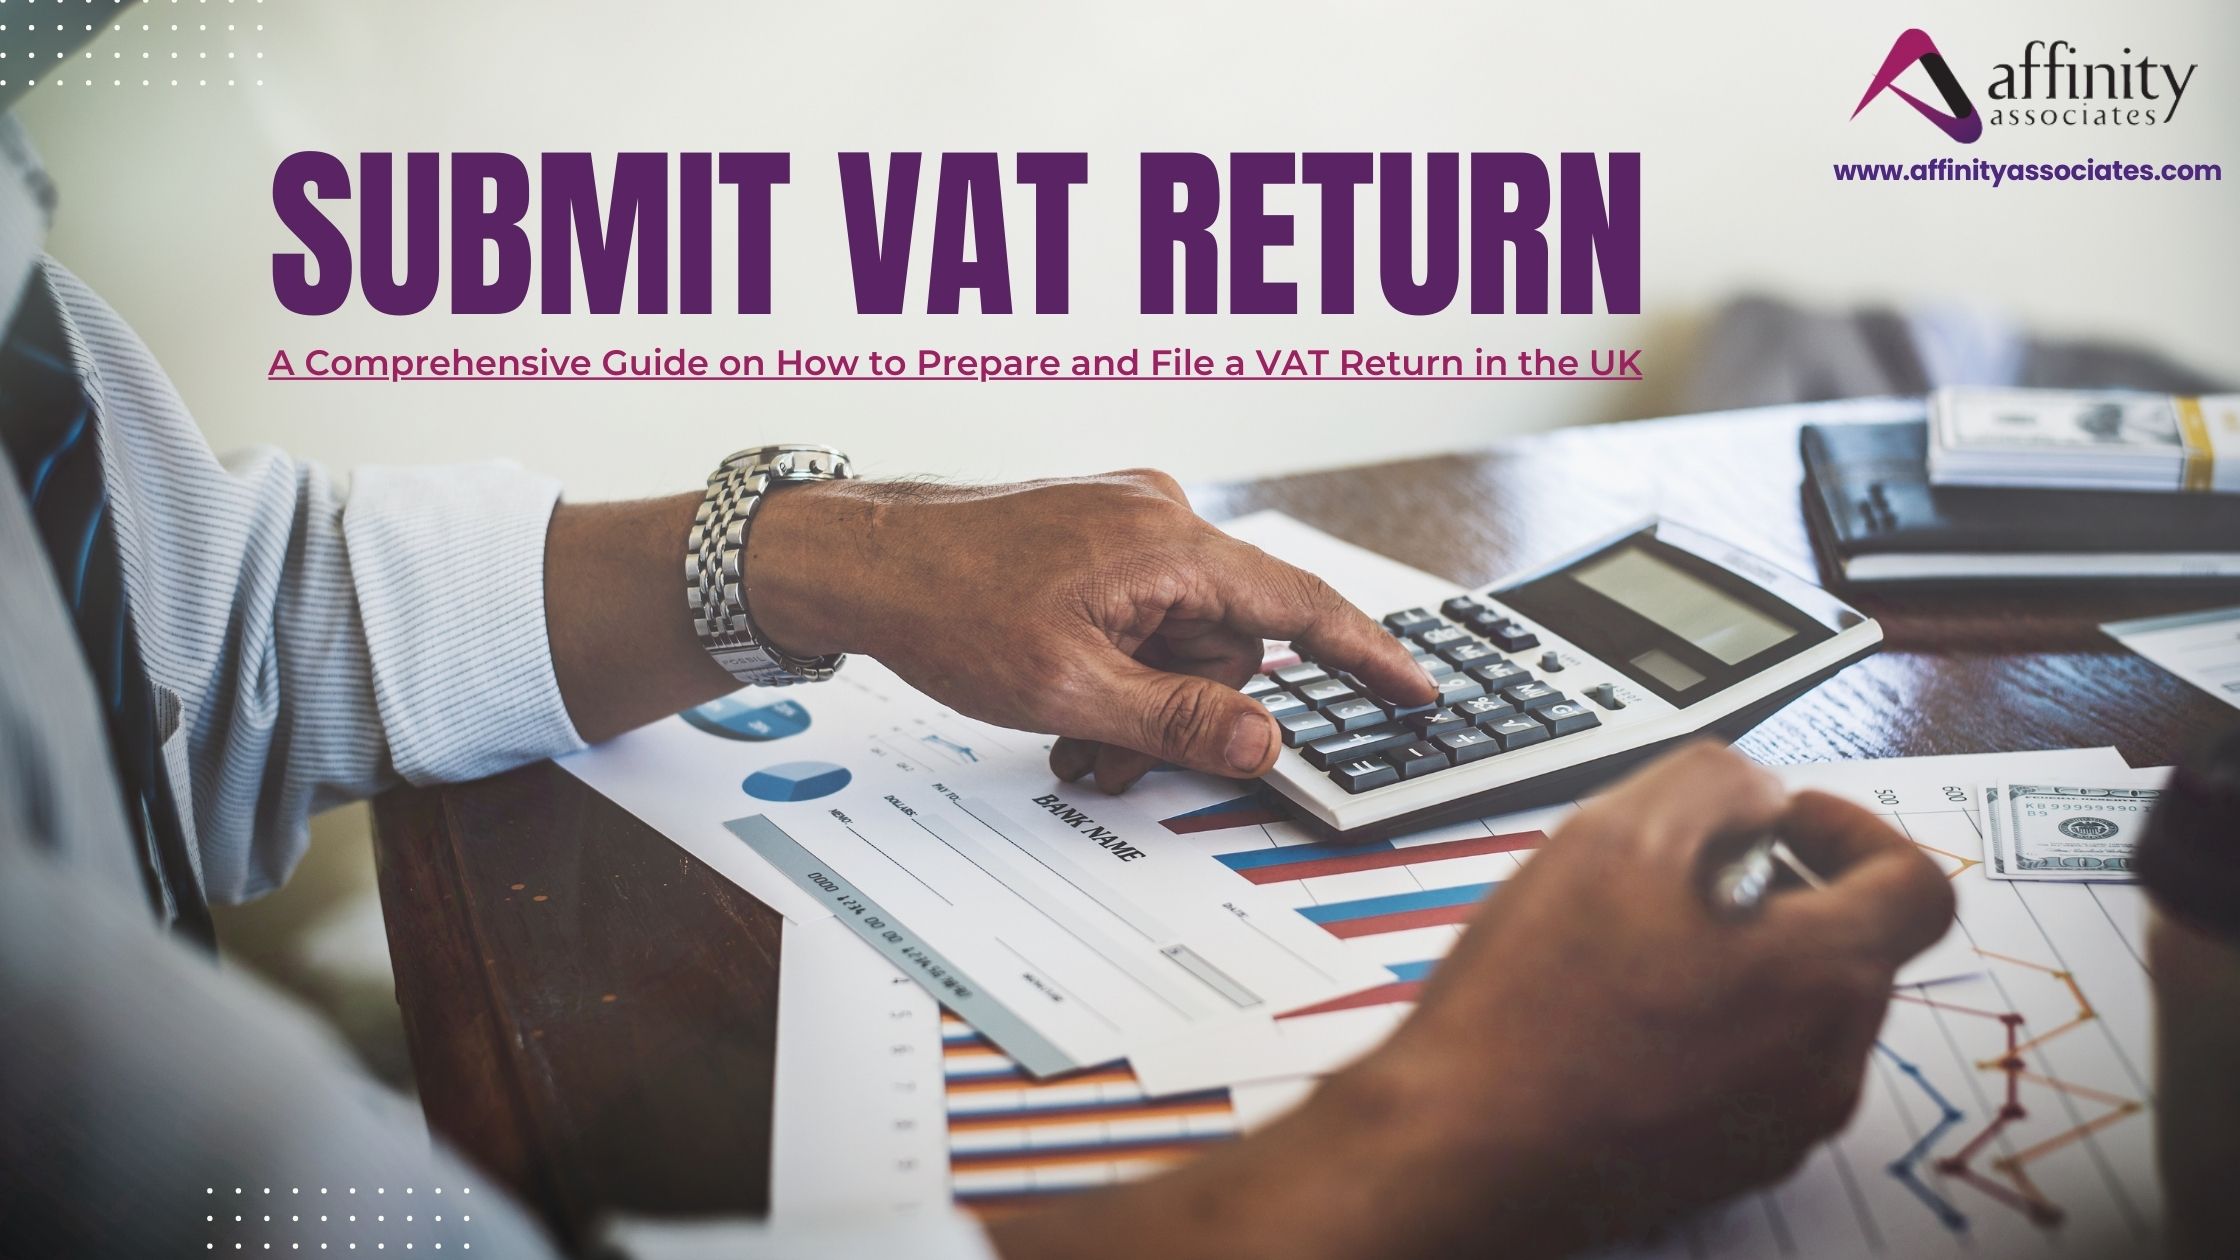 Submit VAT Return: A Comprehensive Guide on How to Prepare and File a VAT Return in UK